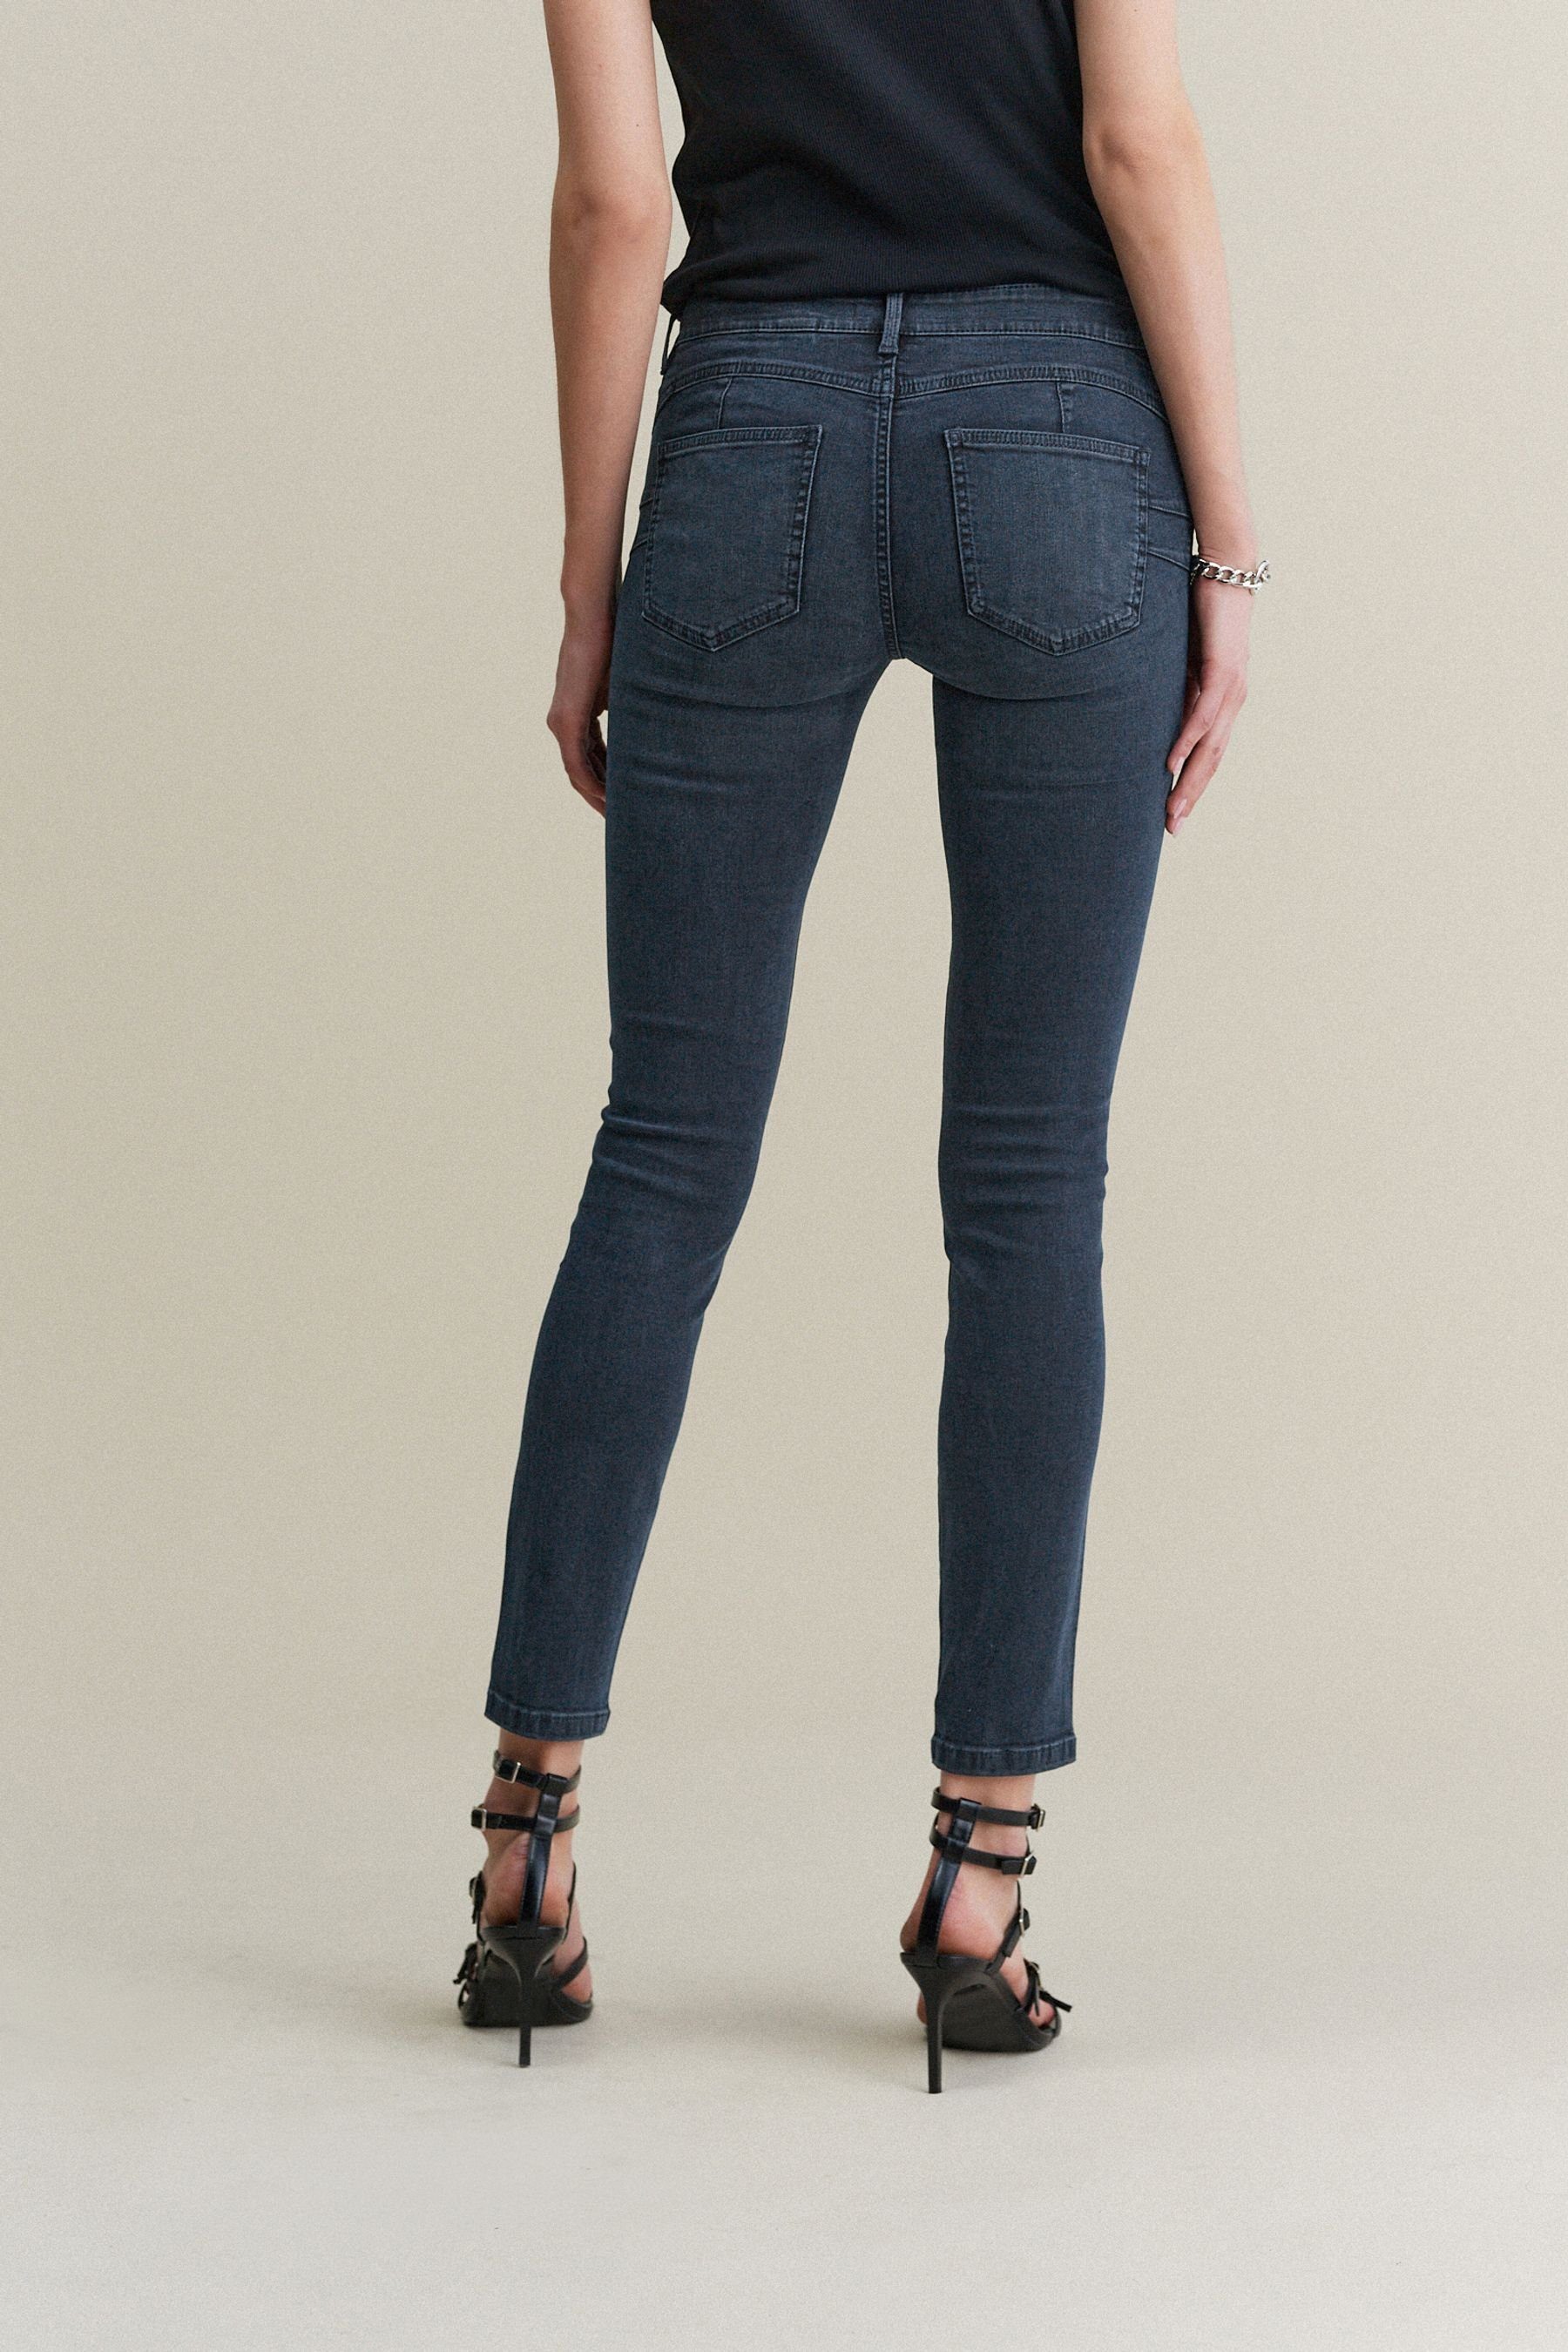 Leibhöhe Skinny (1-tlg) Jeans mit Fit Next niedriger Blue Inky Push-up Push-up-Jeans